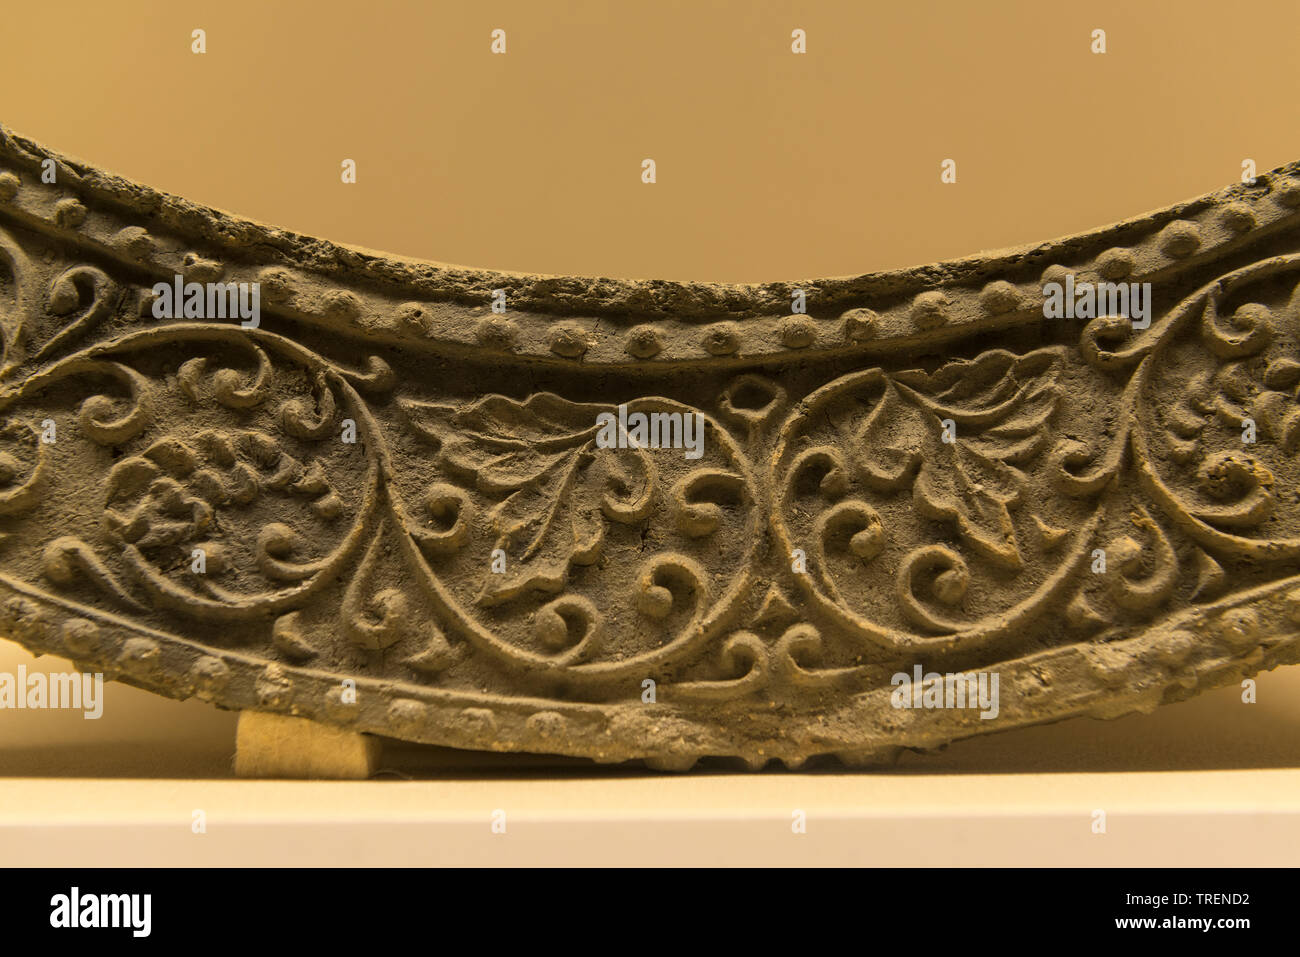 Concave Roof-end Tile with Grapevine Design. Clay. Unified Silla Period. Wolji Pond, Gyeongju, North Gyeongsang-do province. National Museum of Korea Stock Photo